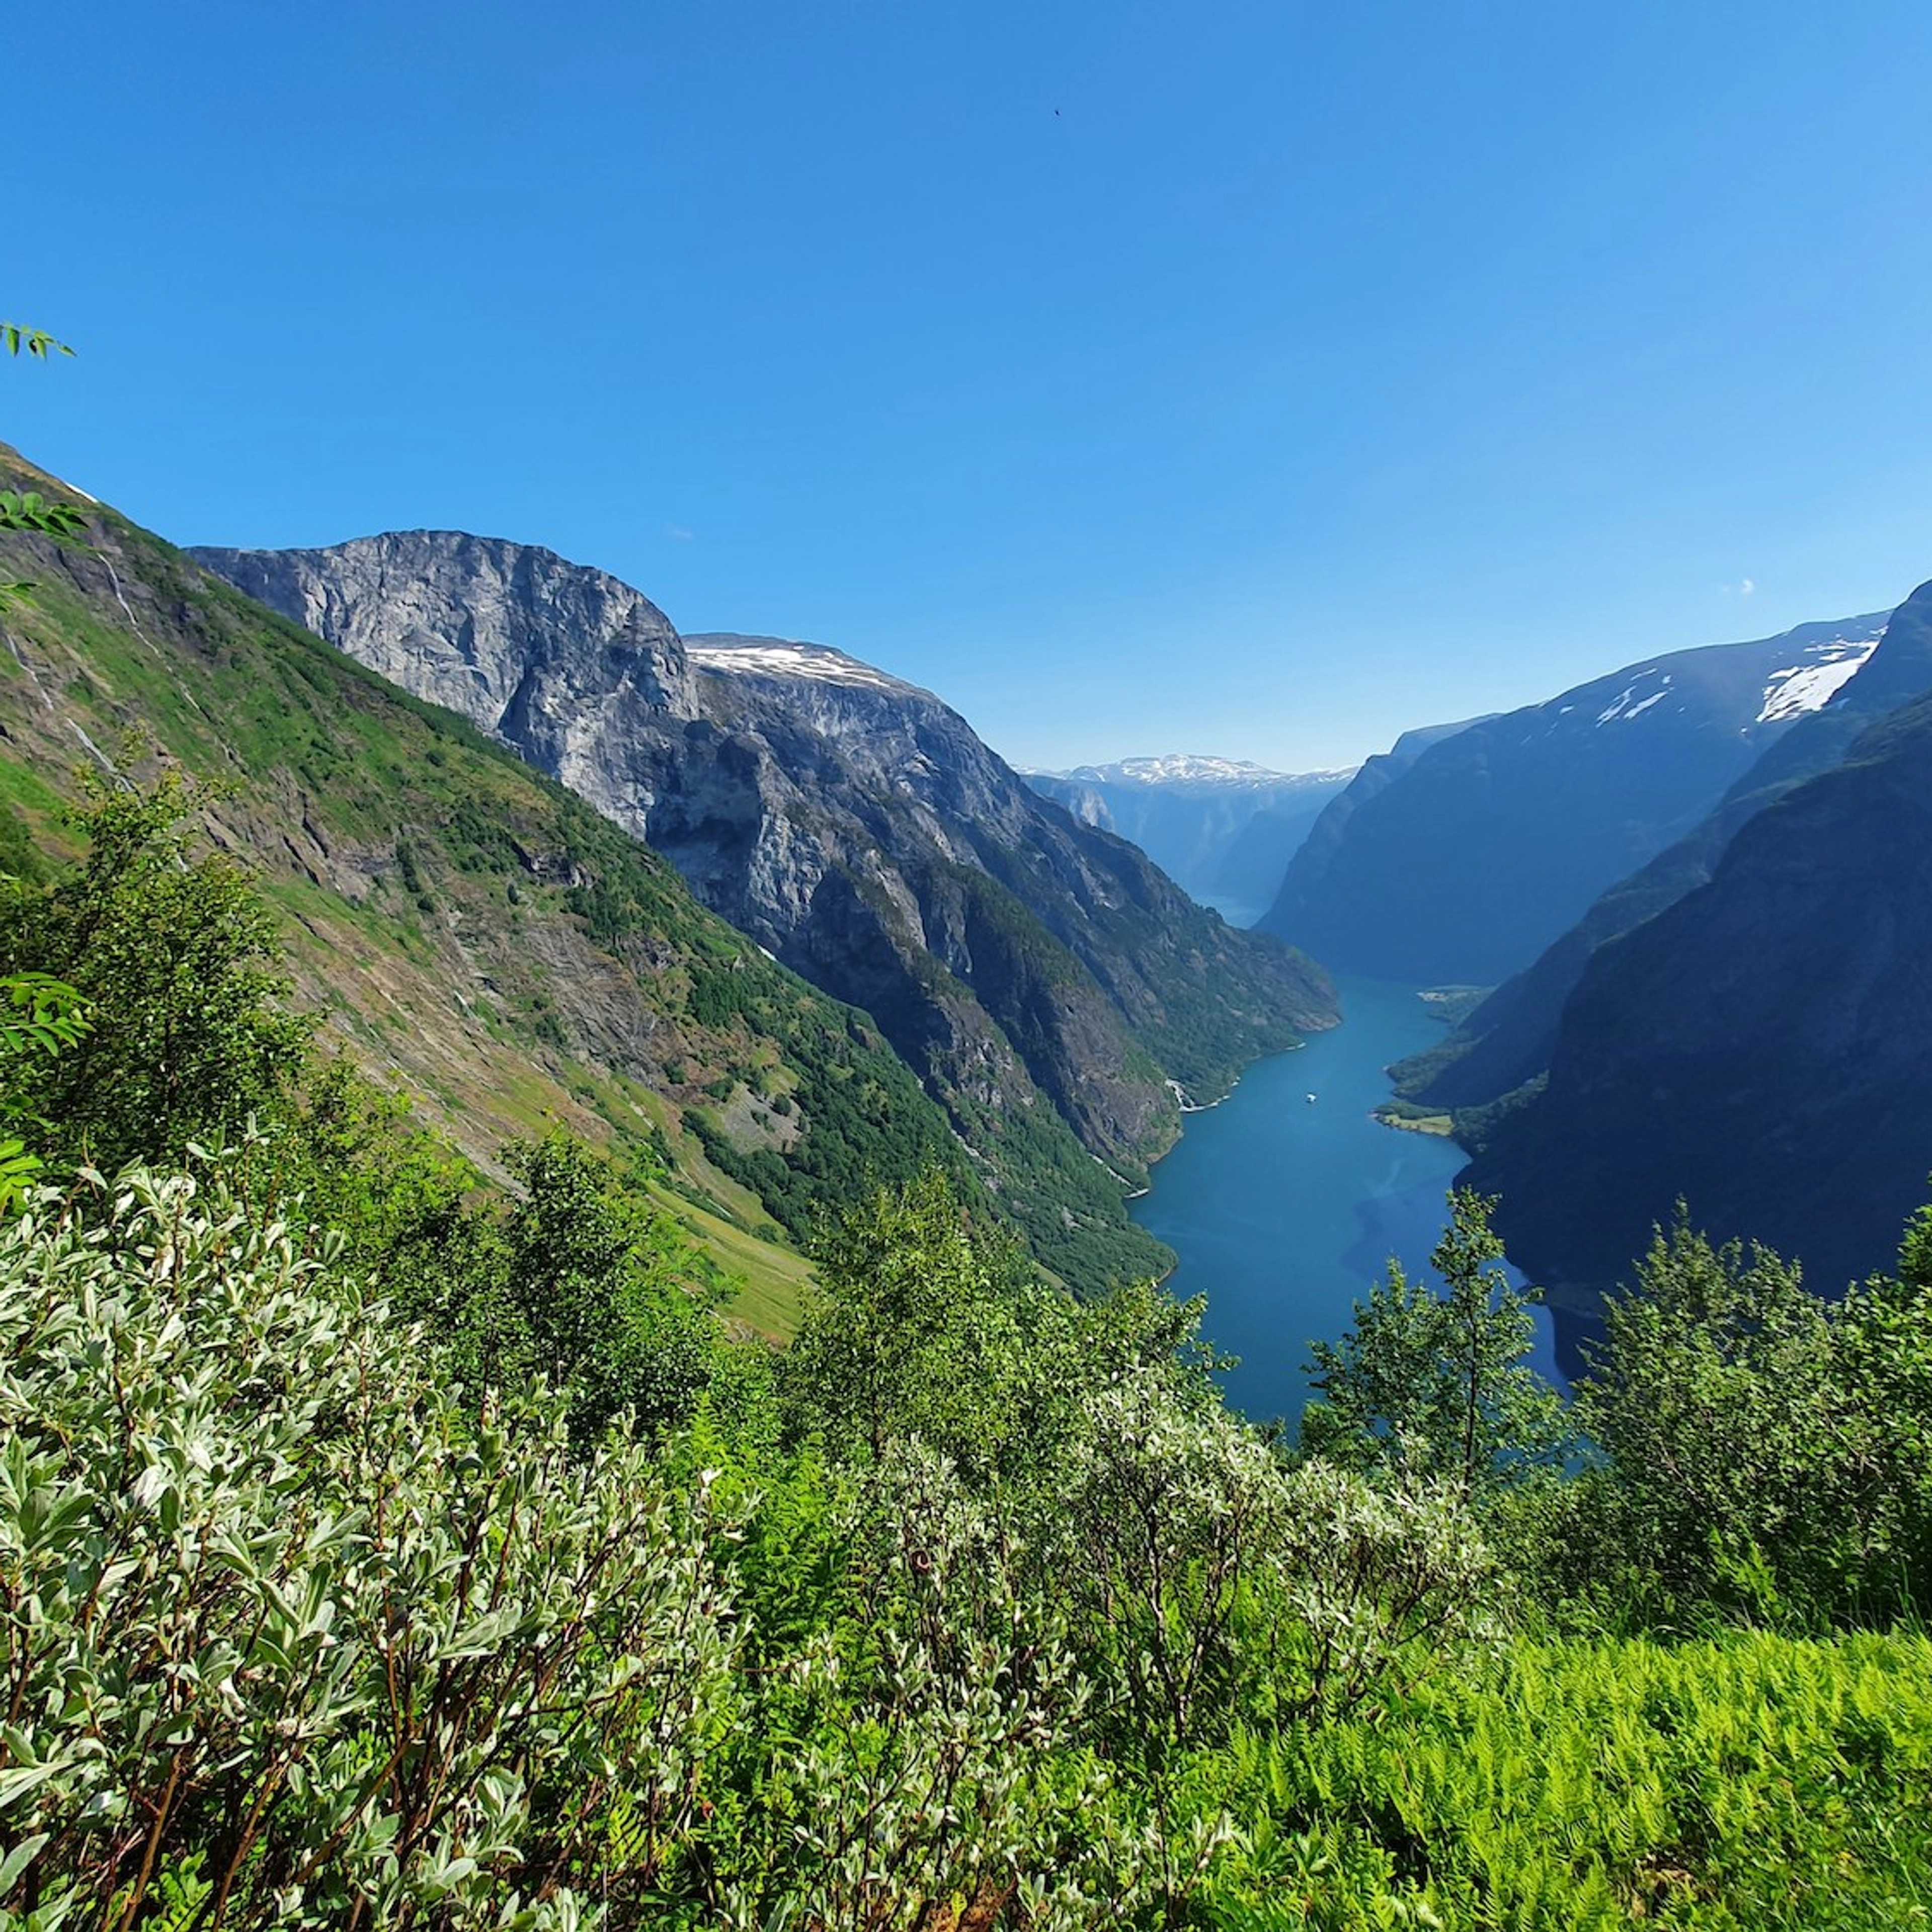 Guided hike to Rimstigen from Voss - View of the UNESCO Nærøyfjord - Voss Norway